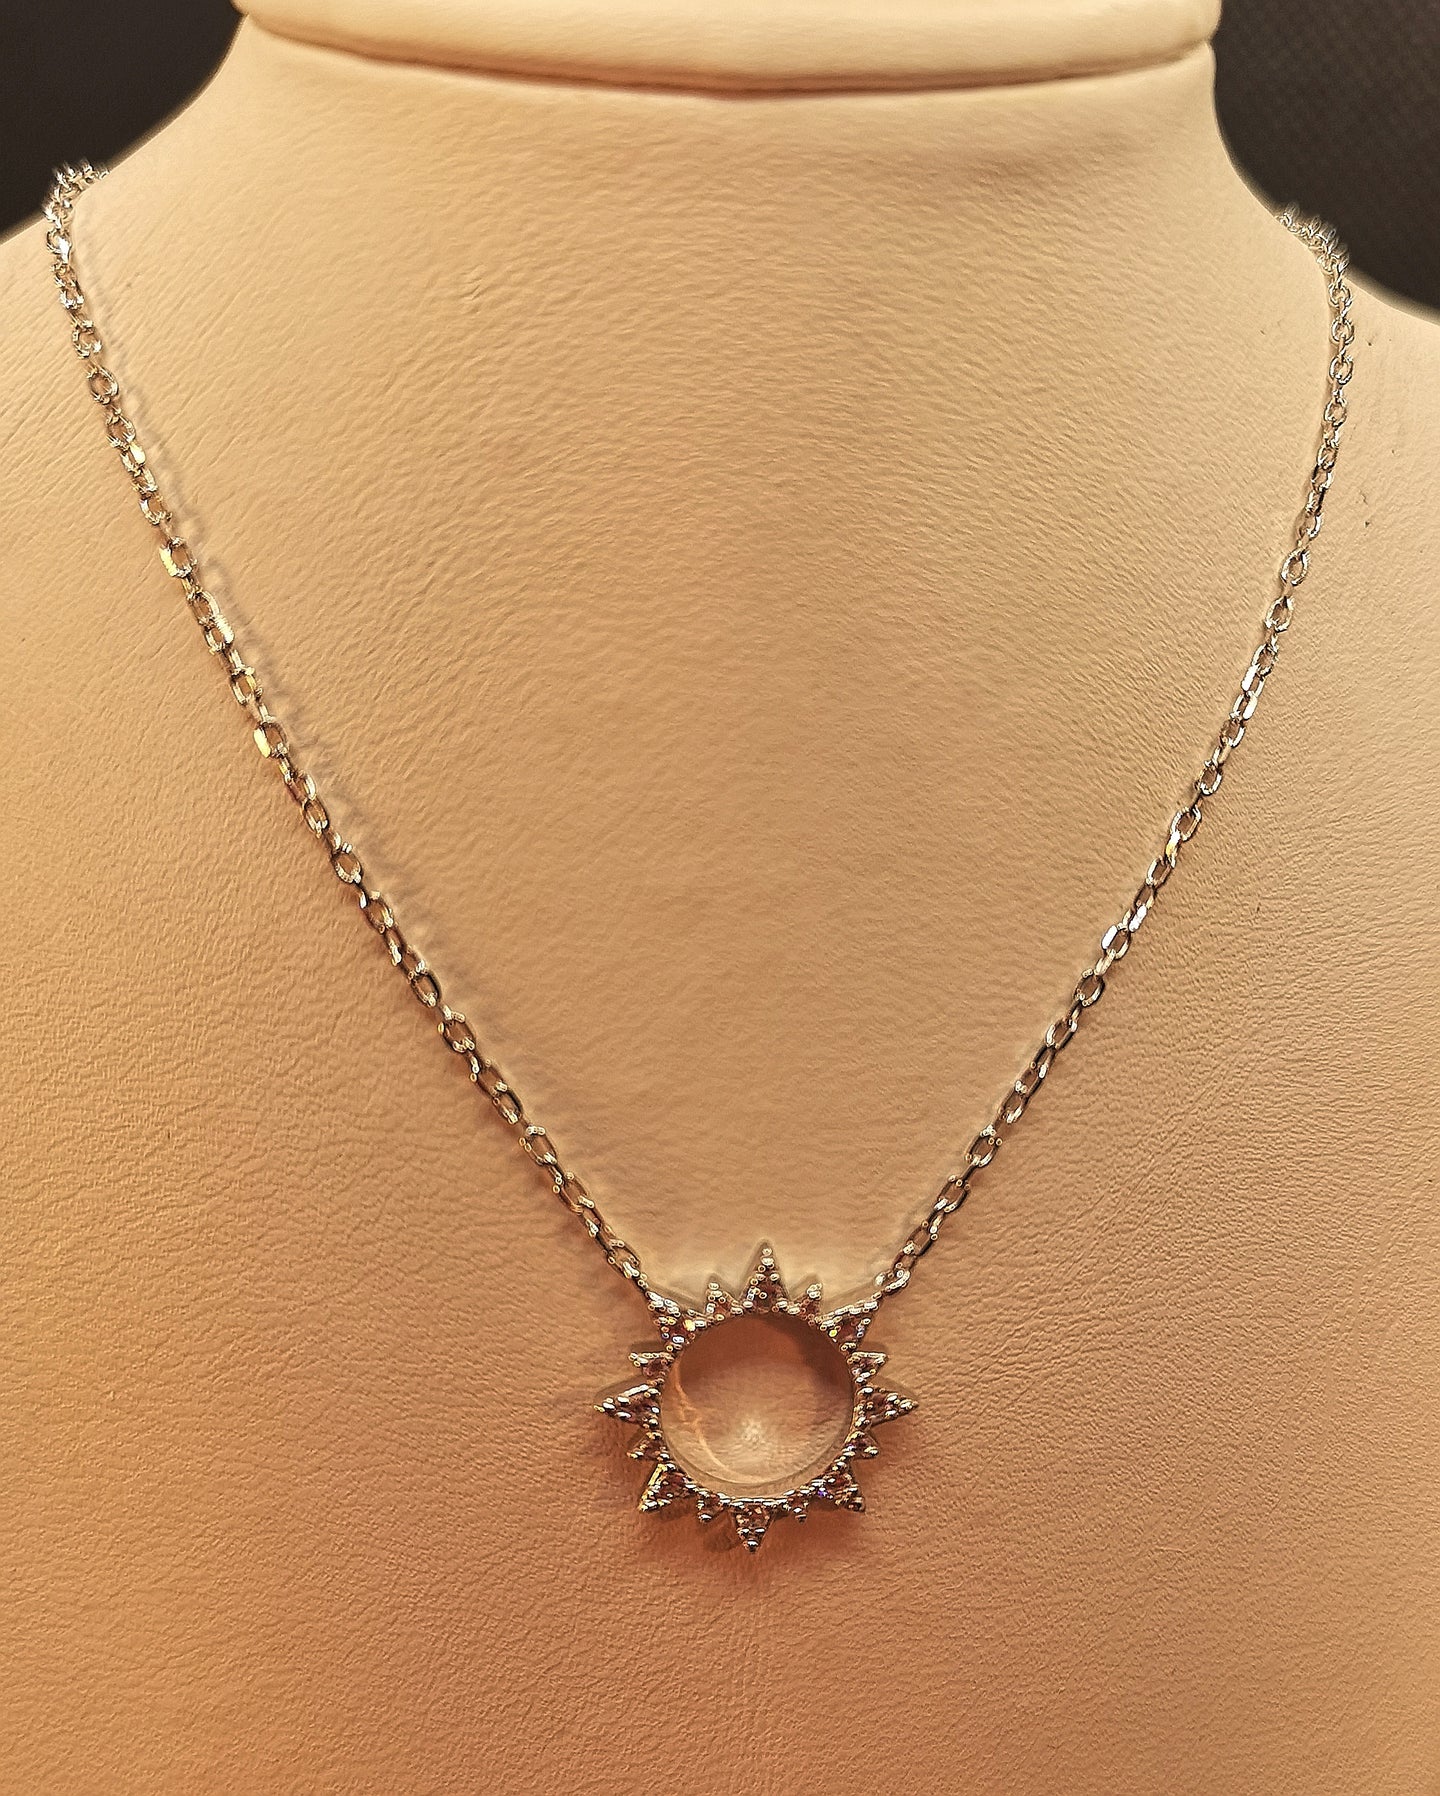 Sterling silver with rhodium finish necklace, cubic inlaid sun pendant